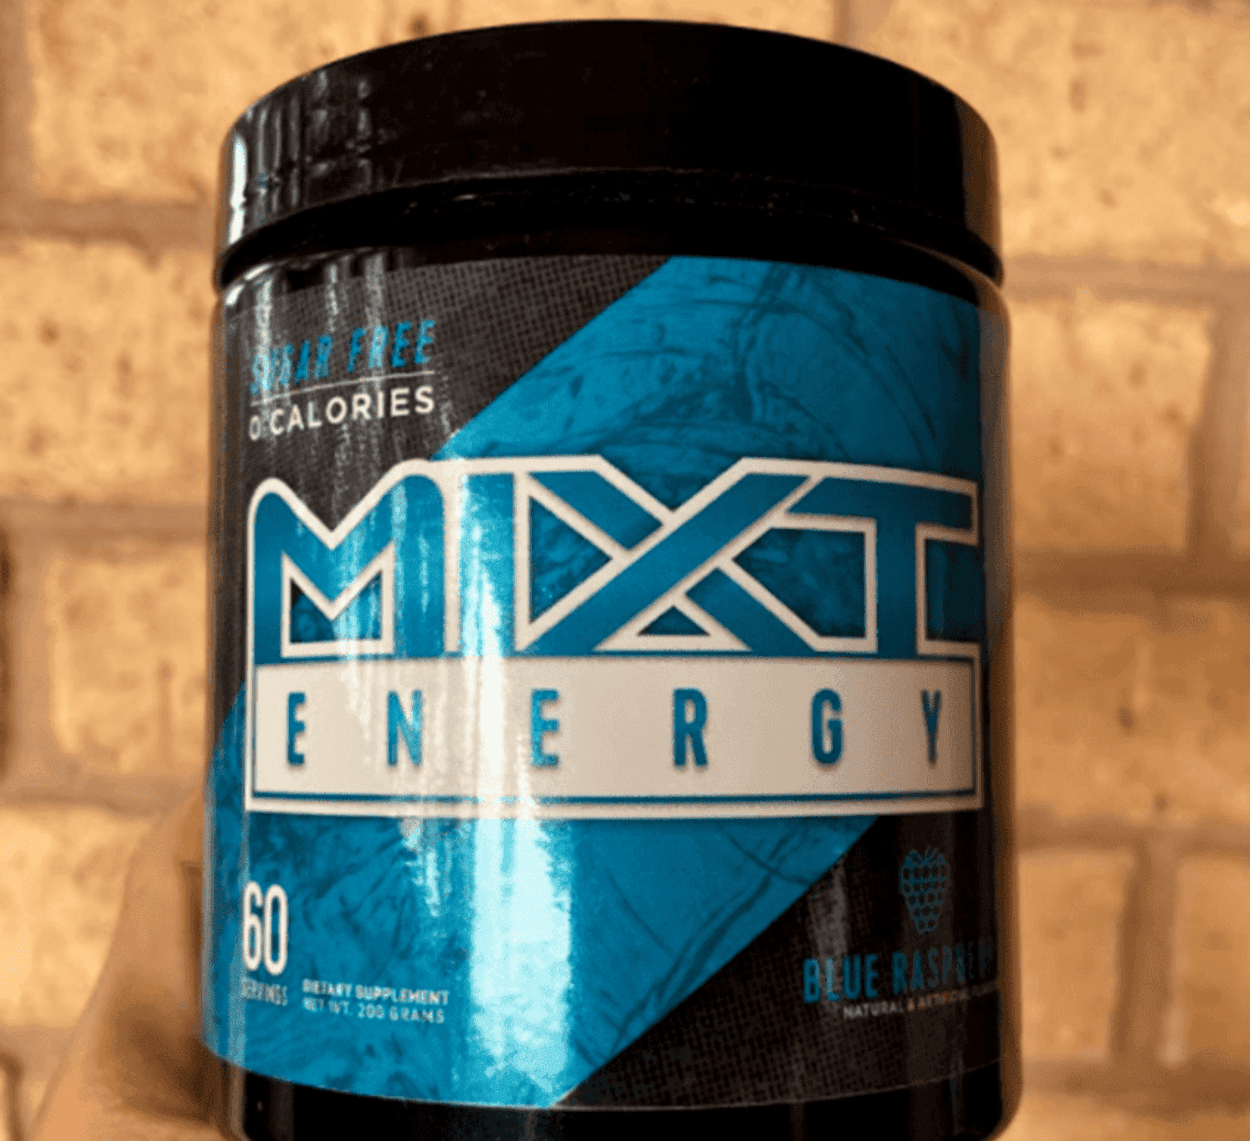 A tub of Mixt Energy.